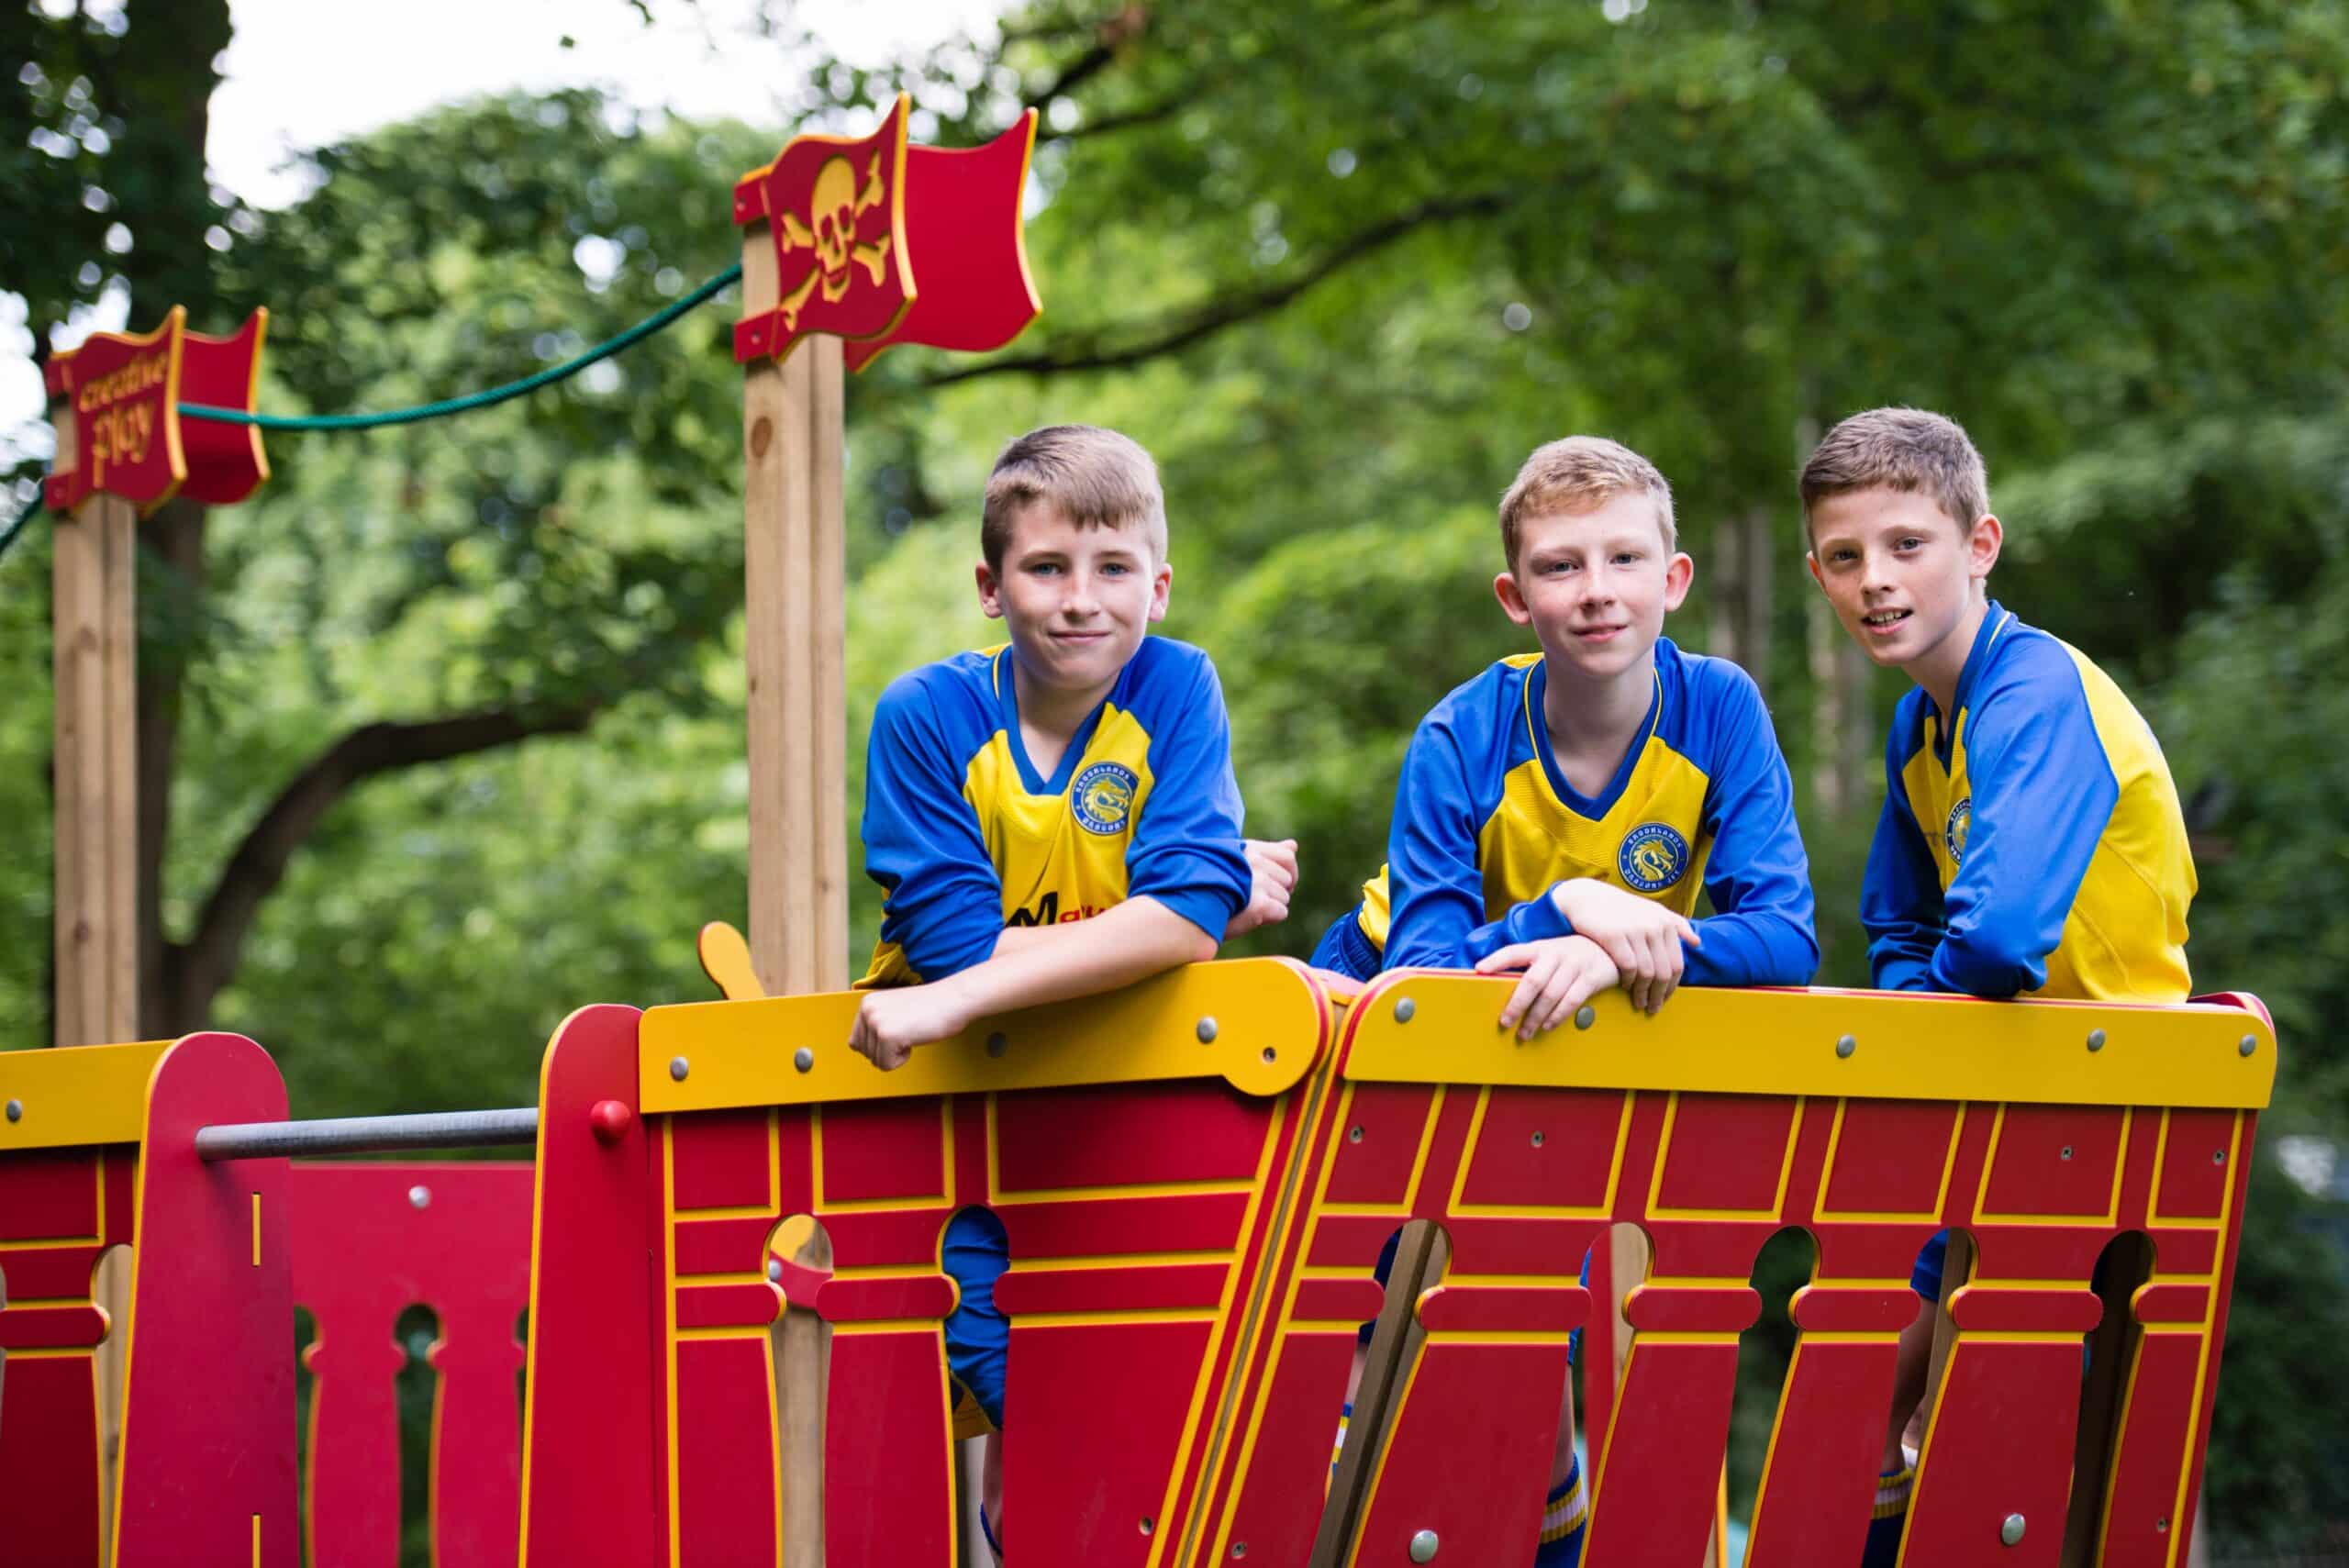 A wooden red ship in a playground with three boys in blue and yellow kits stood on top posing for the camera